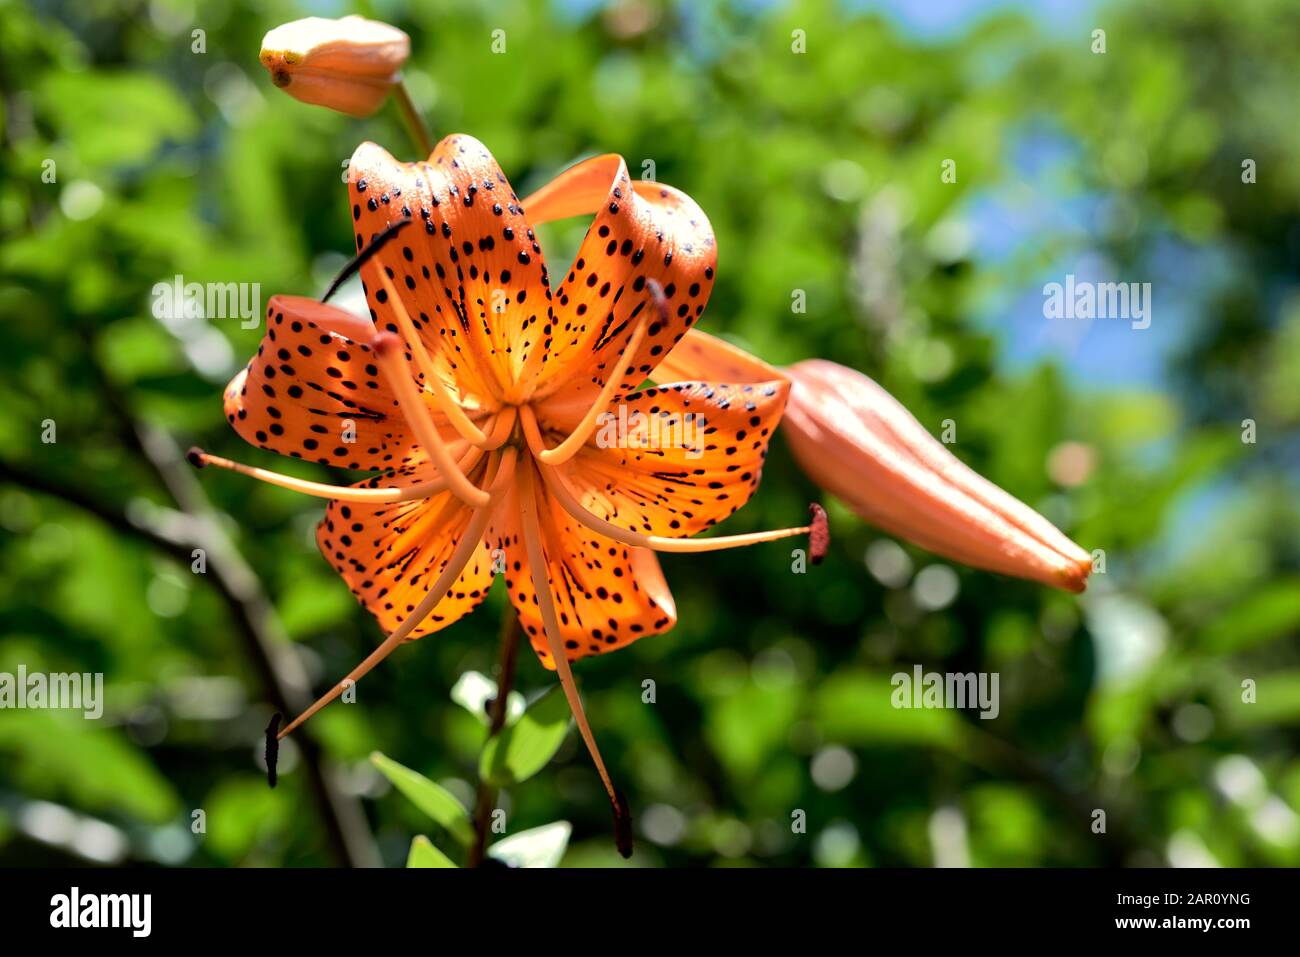 Tiger Lily flower in bloom. Beautiful orange flower with black dots in bloom under a bright summer sun. Natural background. Stock Photo